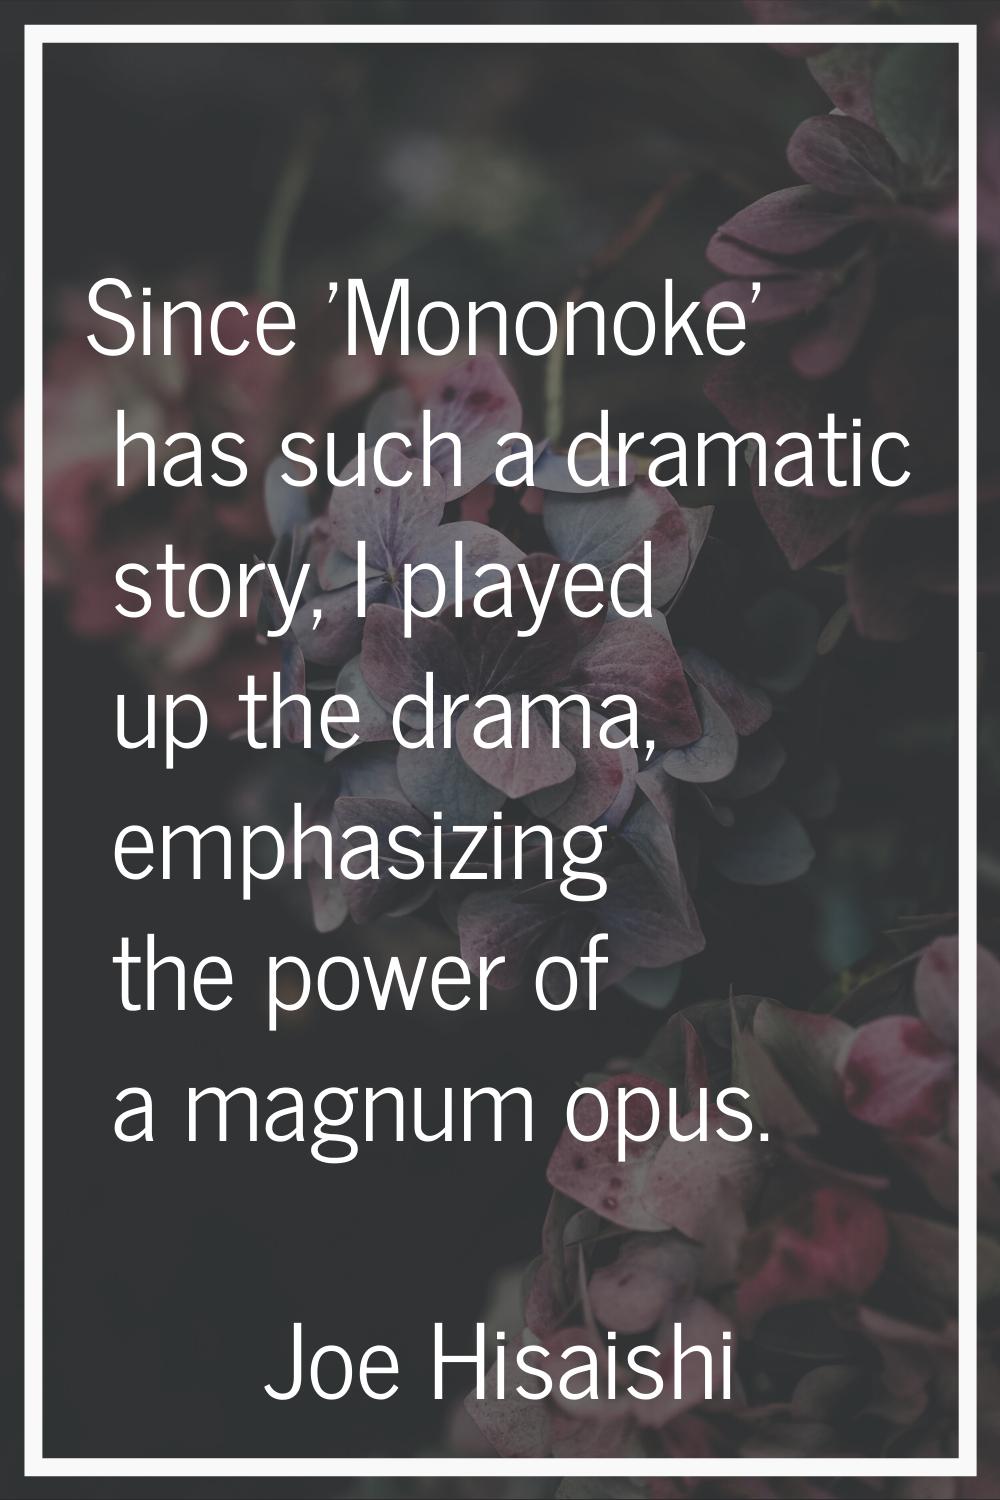 Since 'Mononoke' has such a dramatic story, I played up the drama, emphasizing the power of a magnu